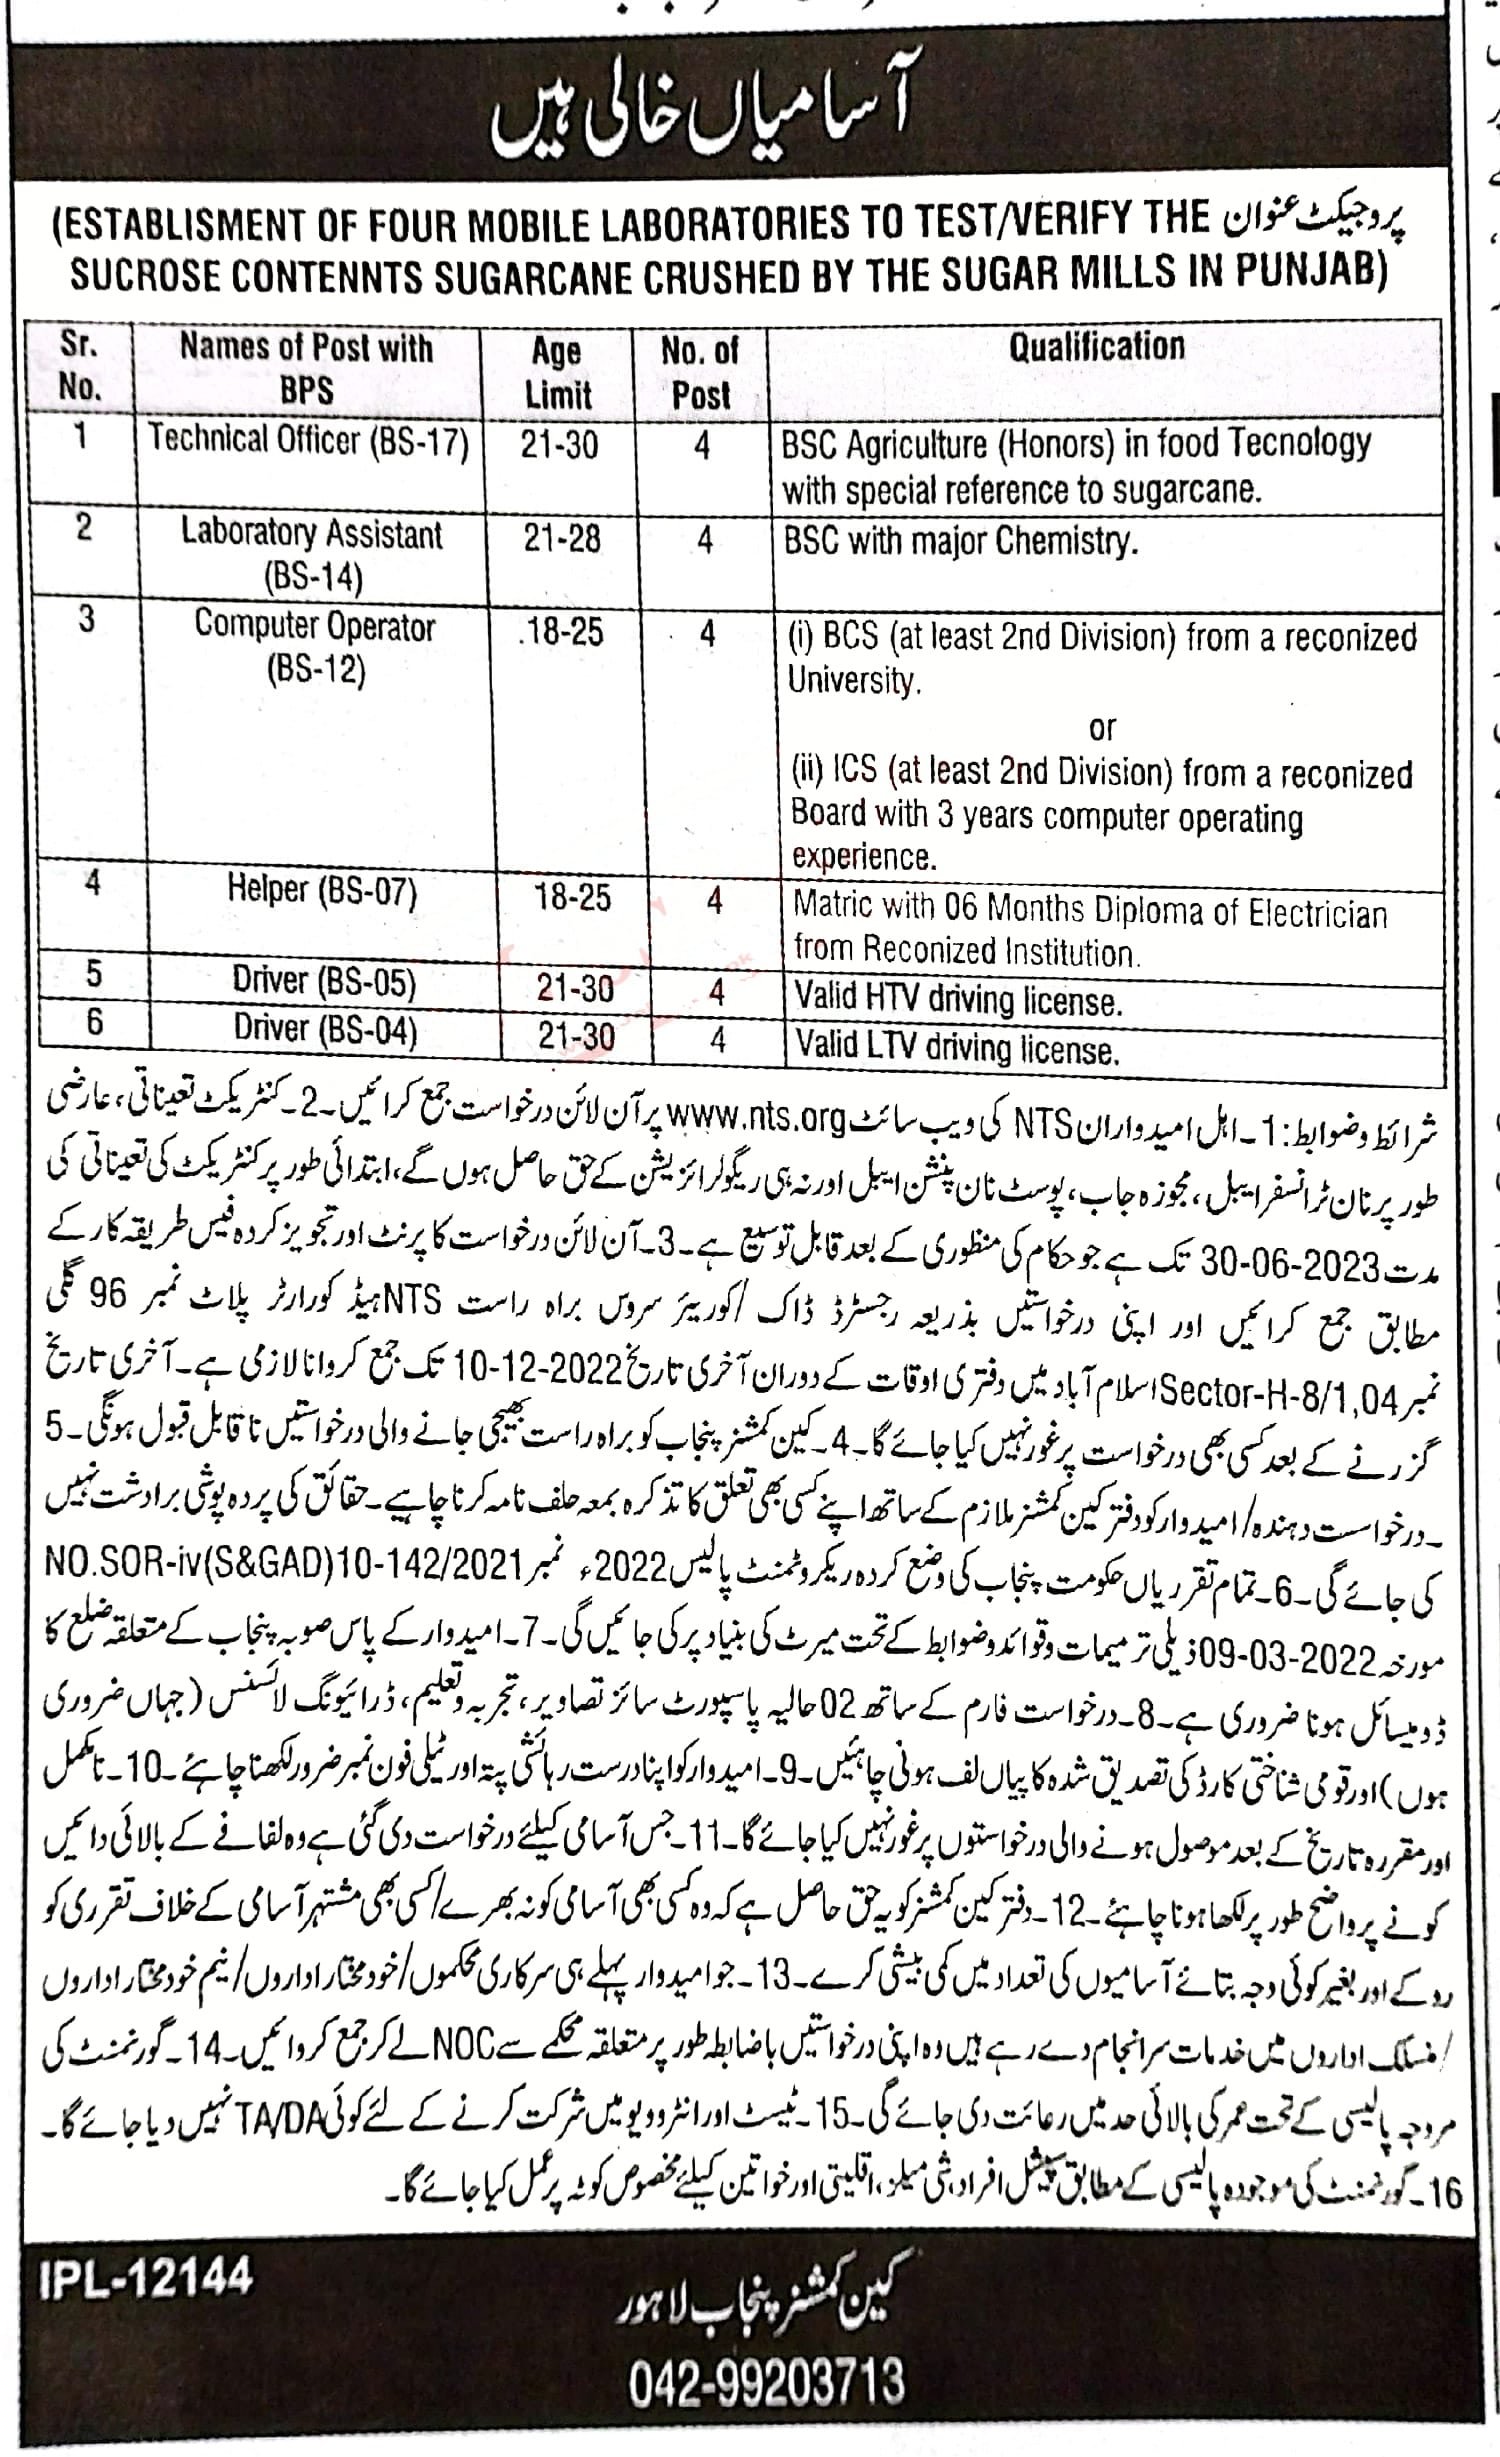 Office of the Cane Commissioner Punjab Jobs 2022 Apply via NTS